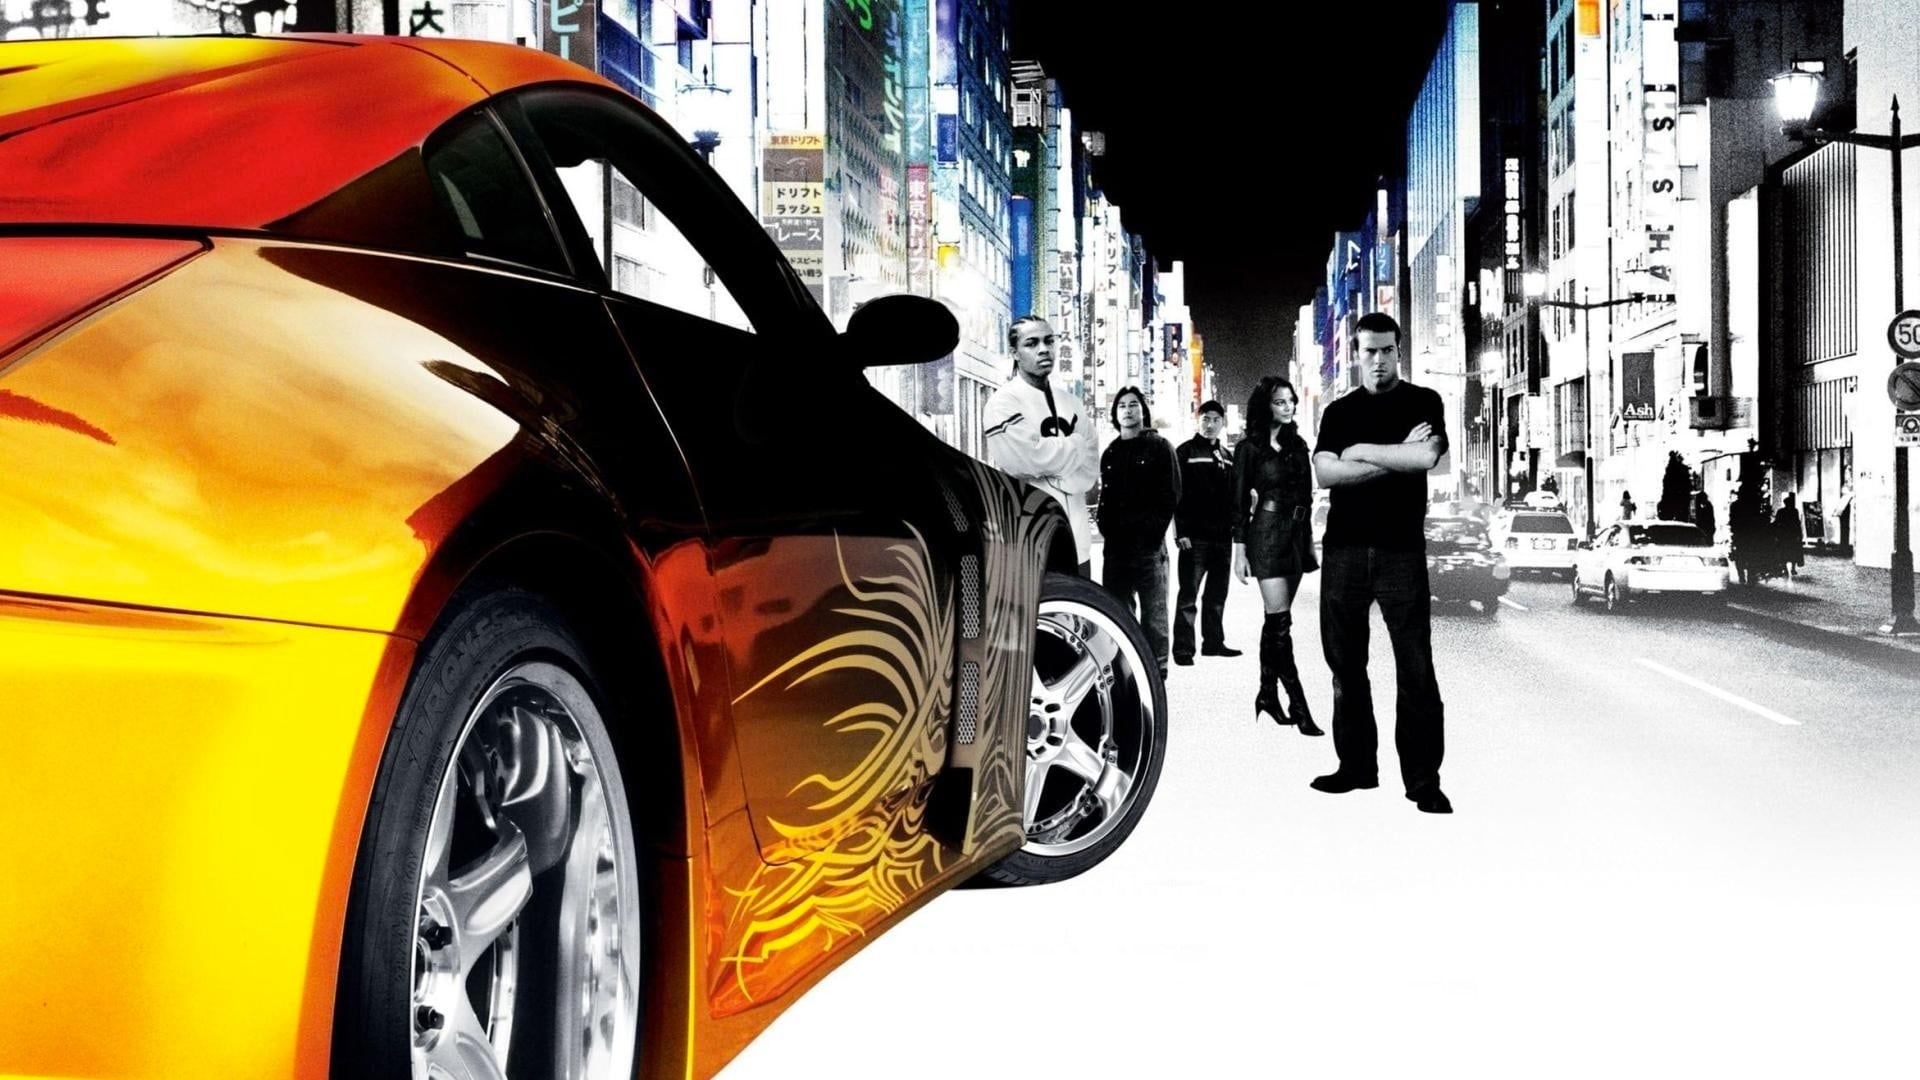 The Fast and the Furious: Tokyo Drift 2006 123movies